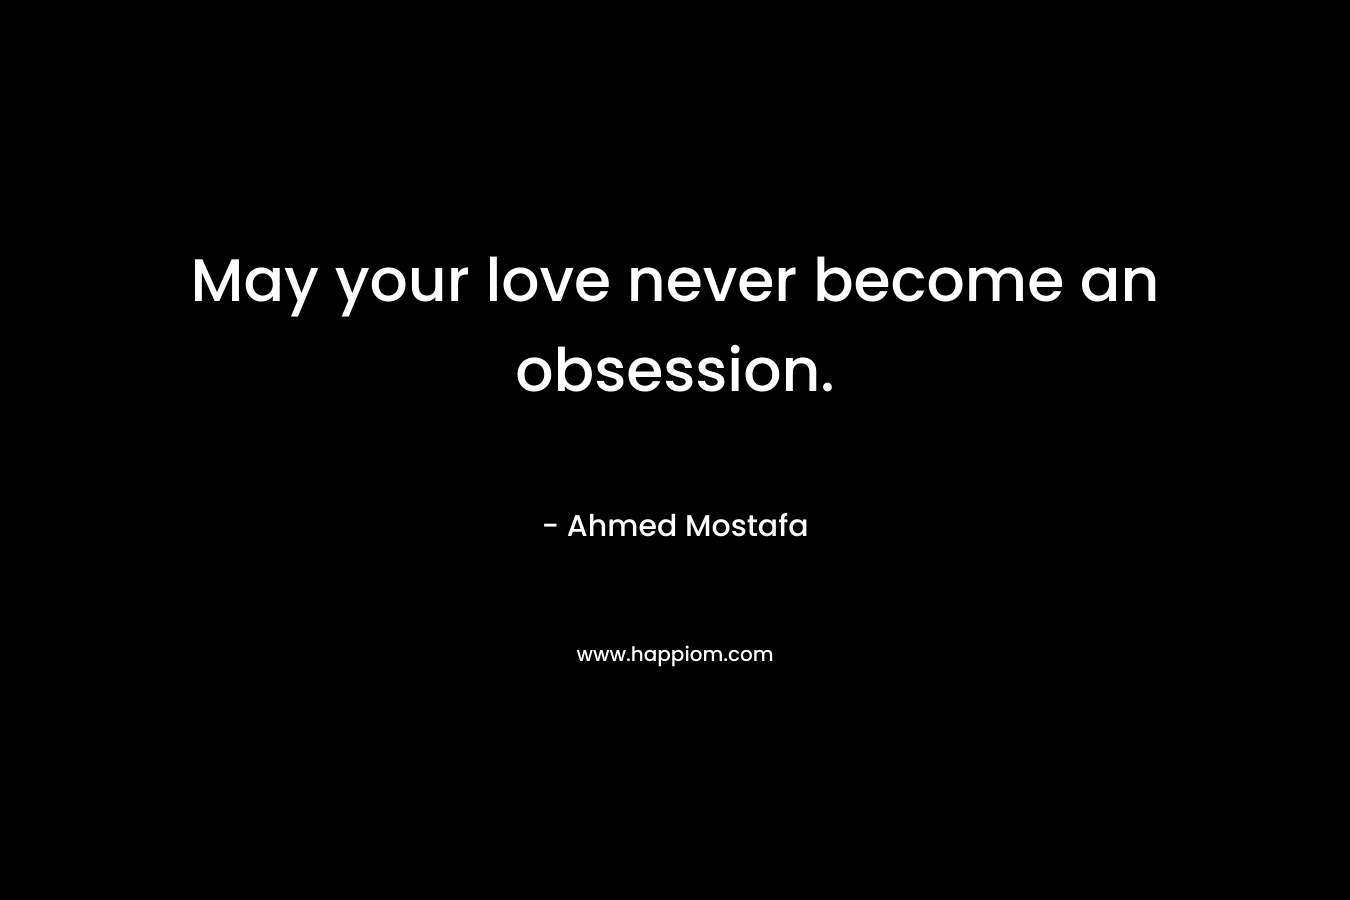 May your love never become an obsession.